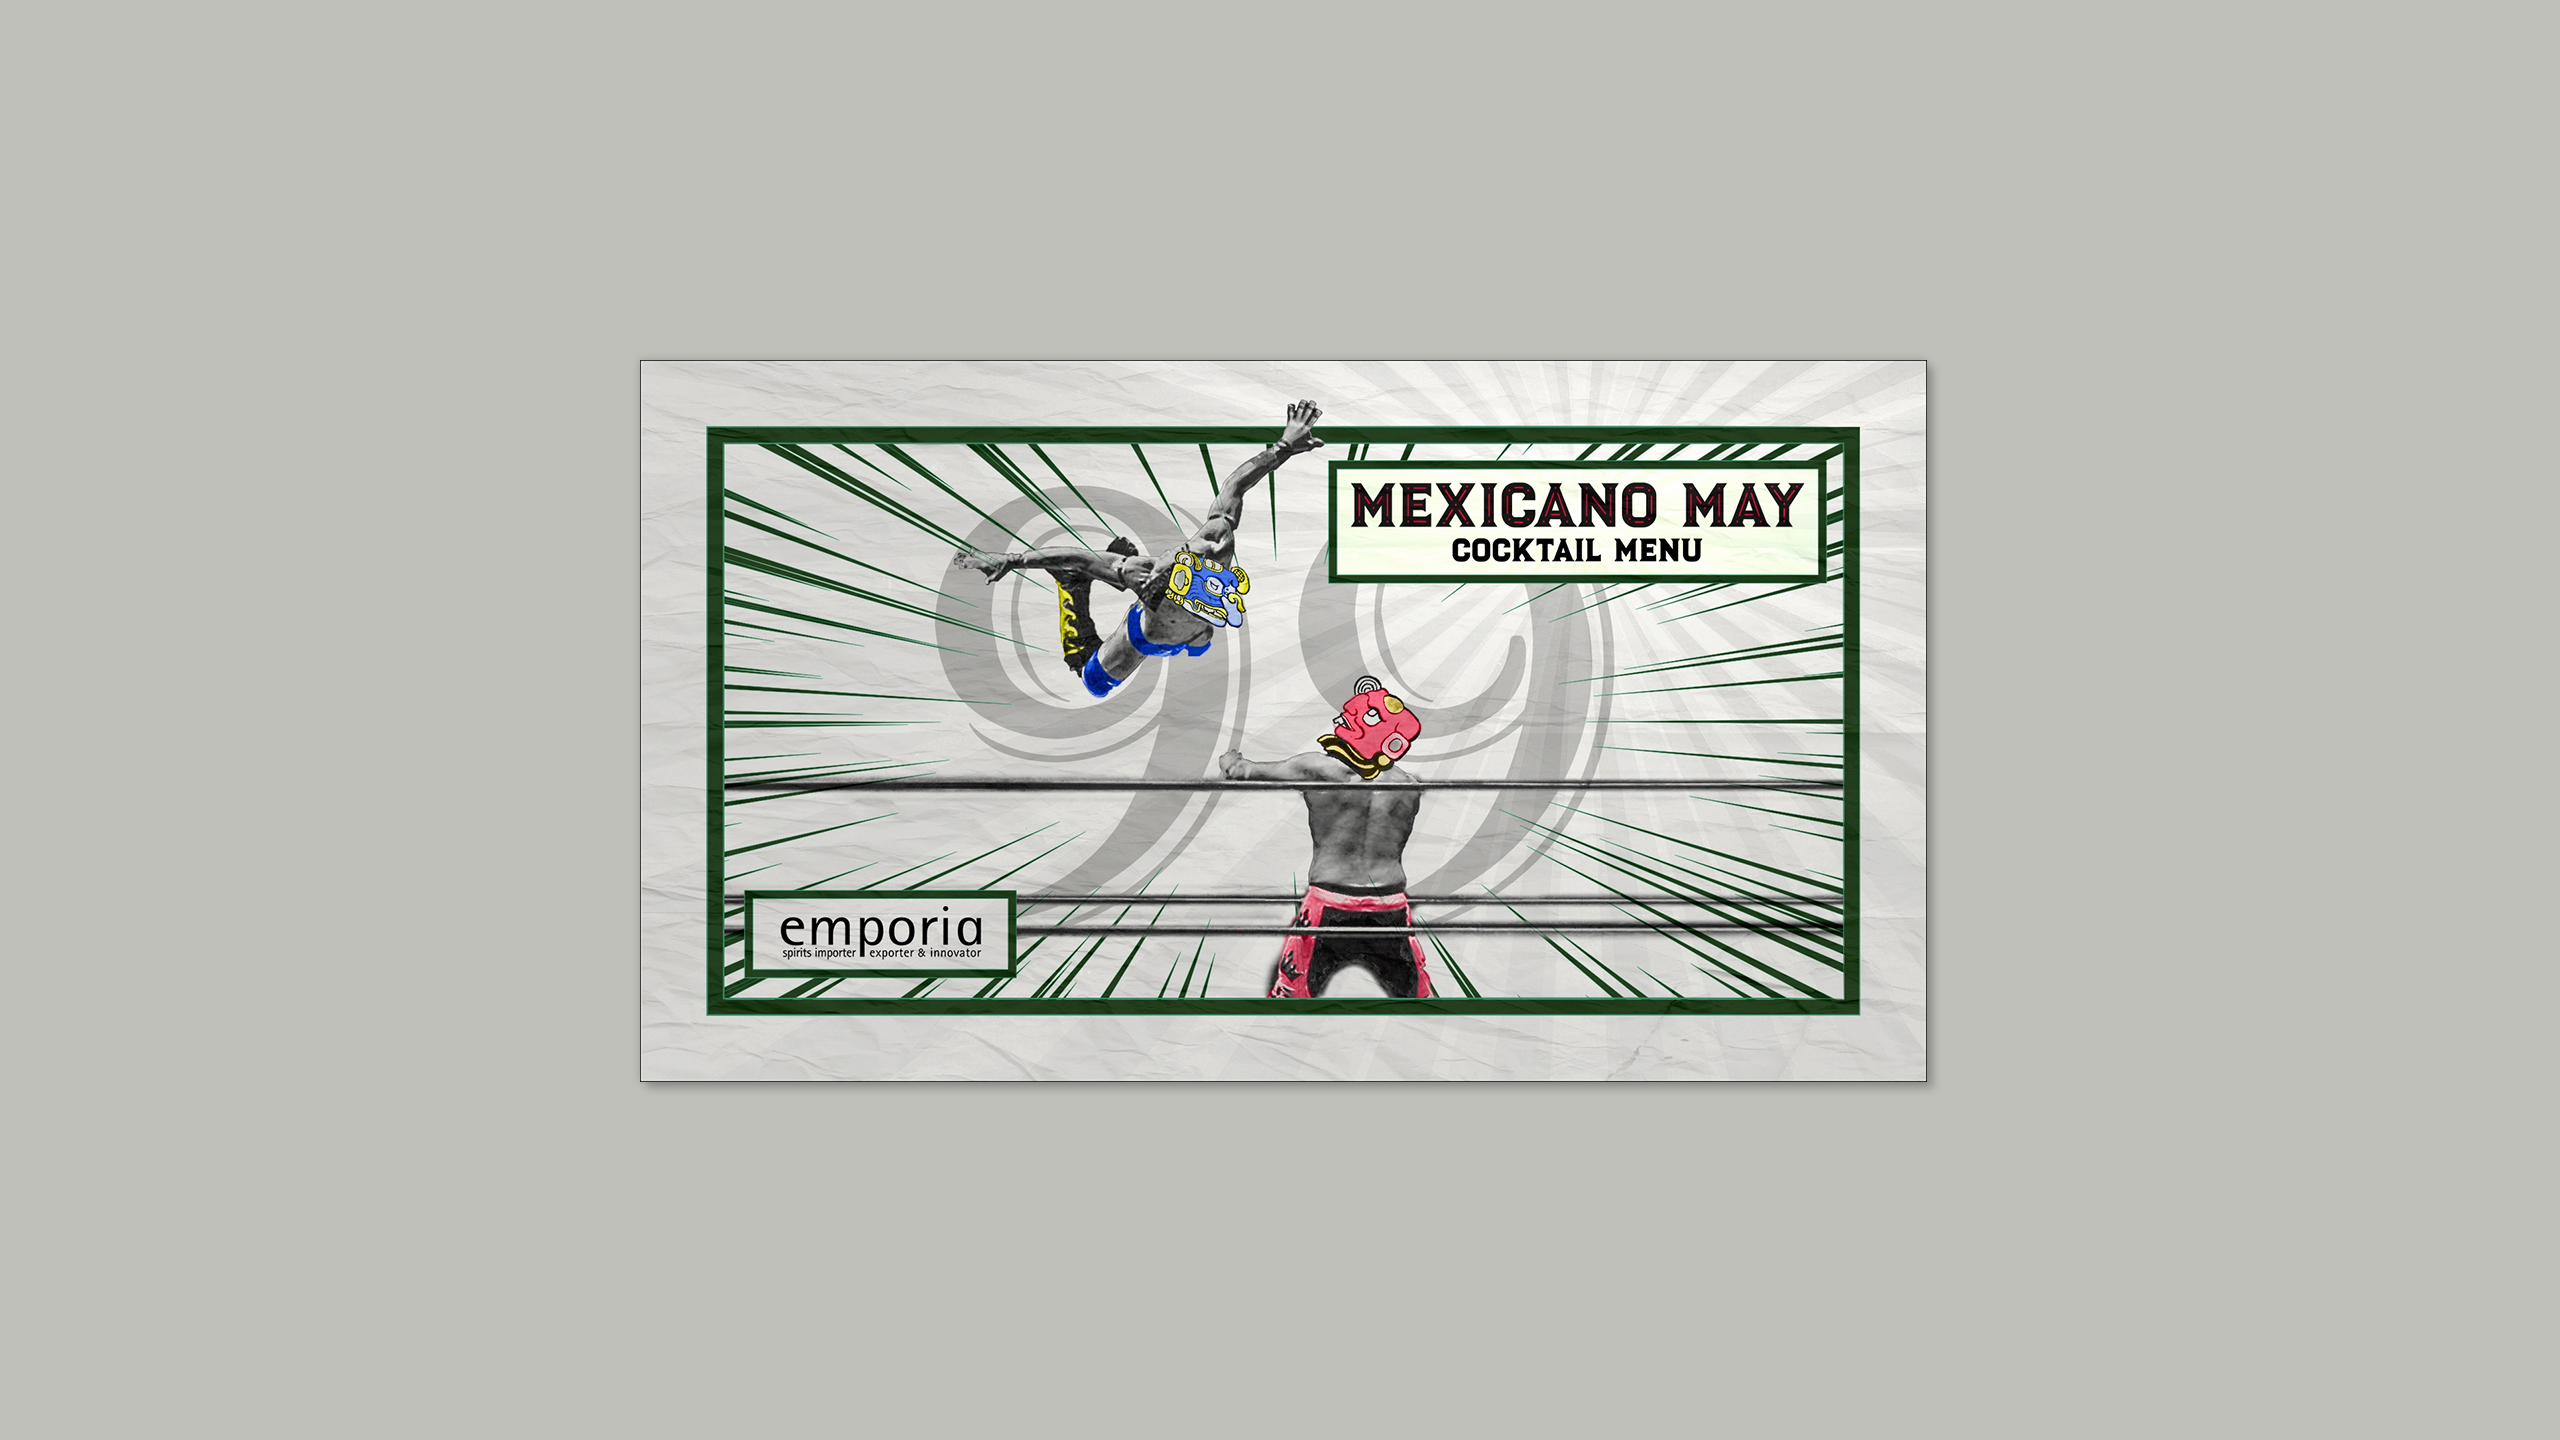 Emporia Brands - Mexicano May Cocktail Menu designed by Dephined